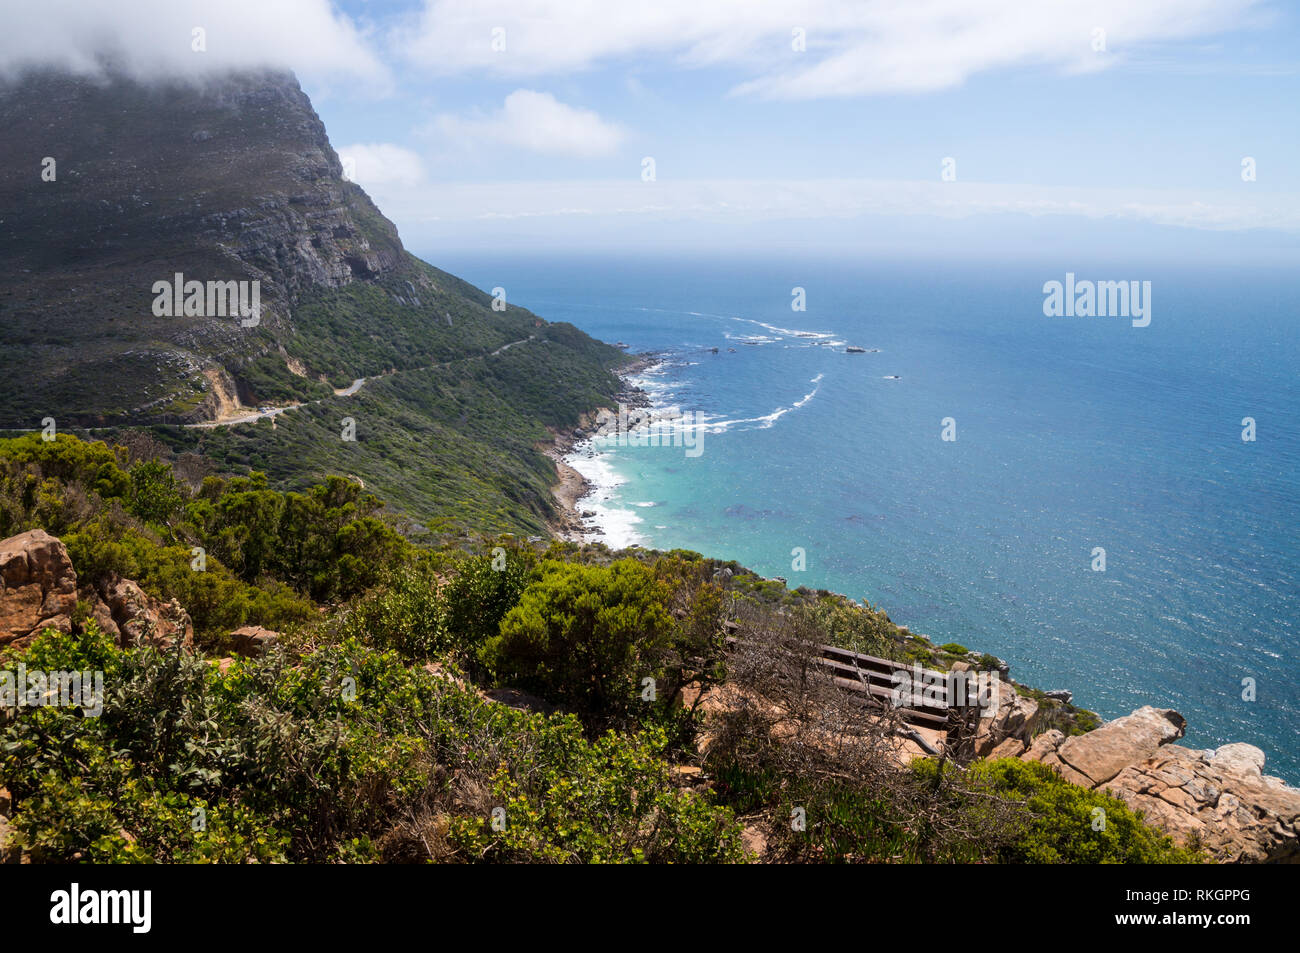 Aerial view of steep cliffs from Cape of Good Hope, South Africa Stock Photo